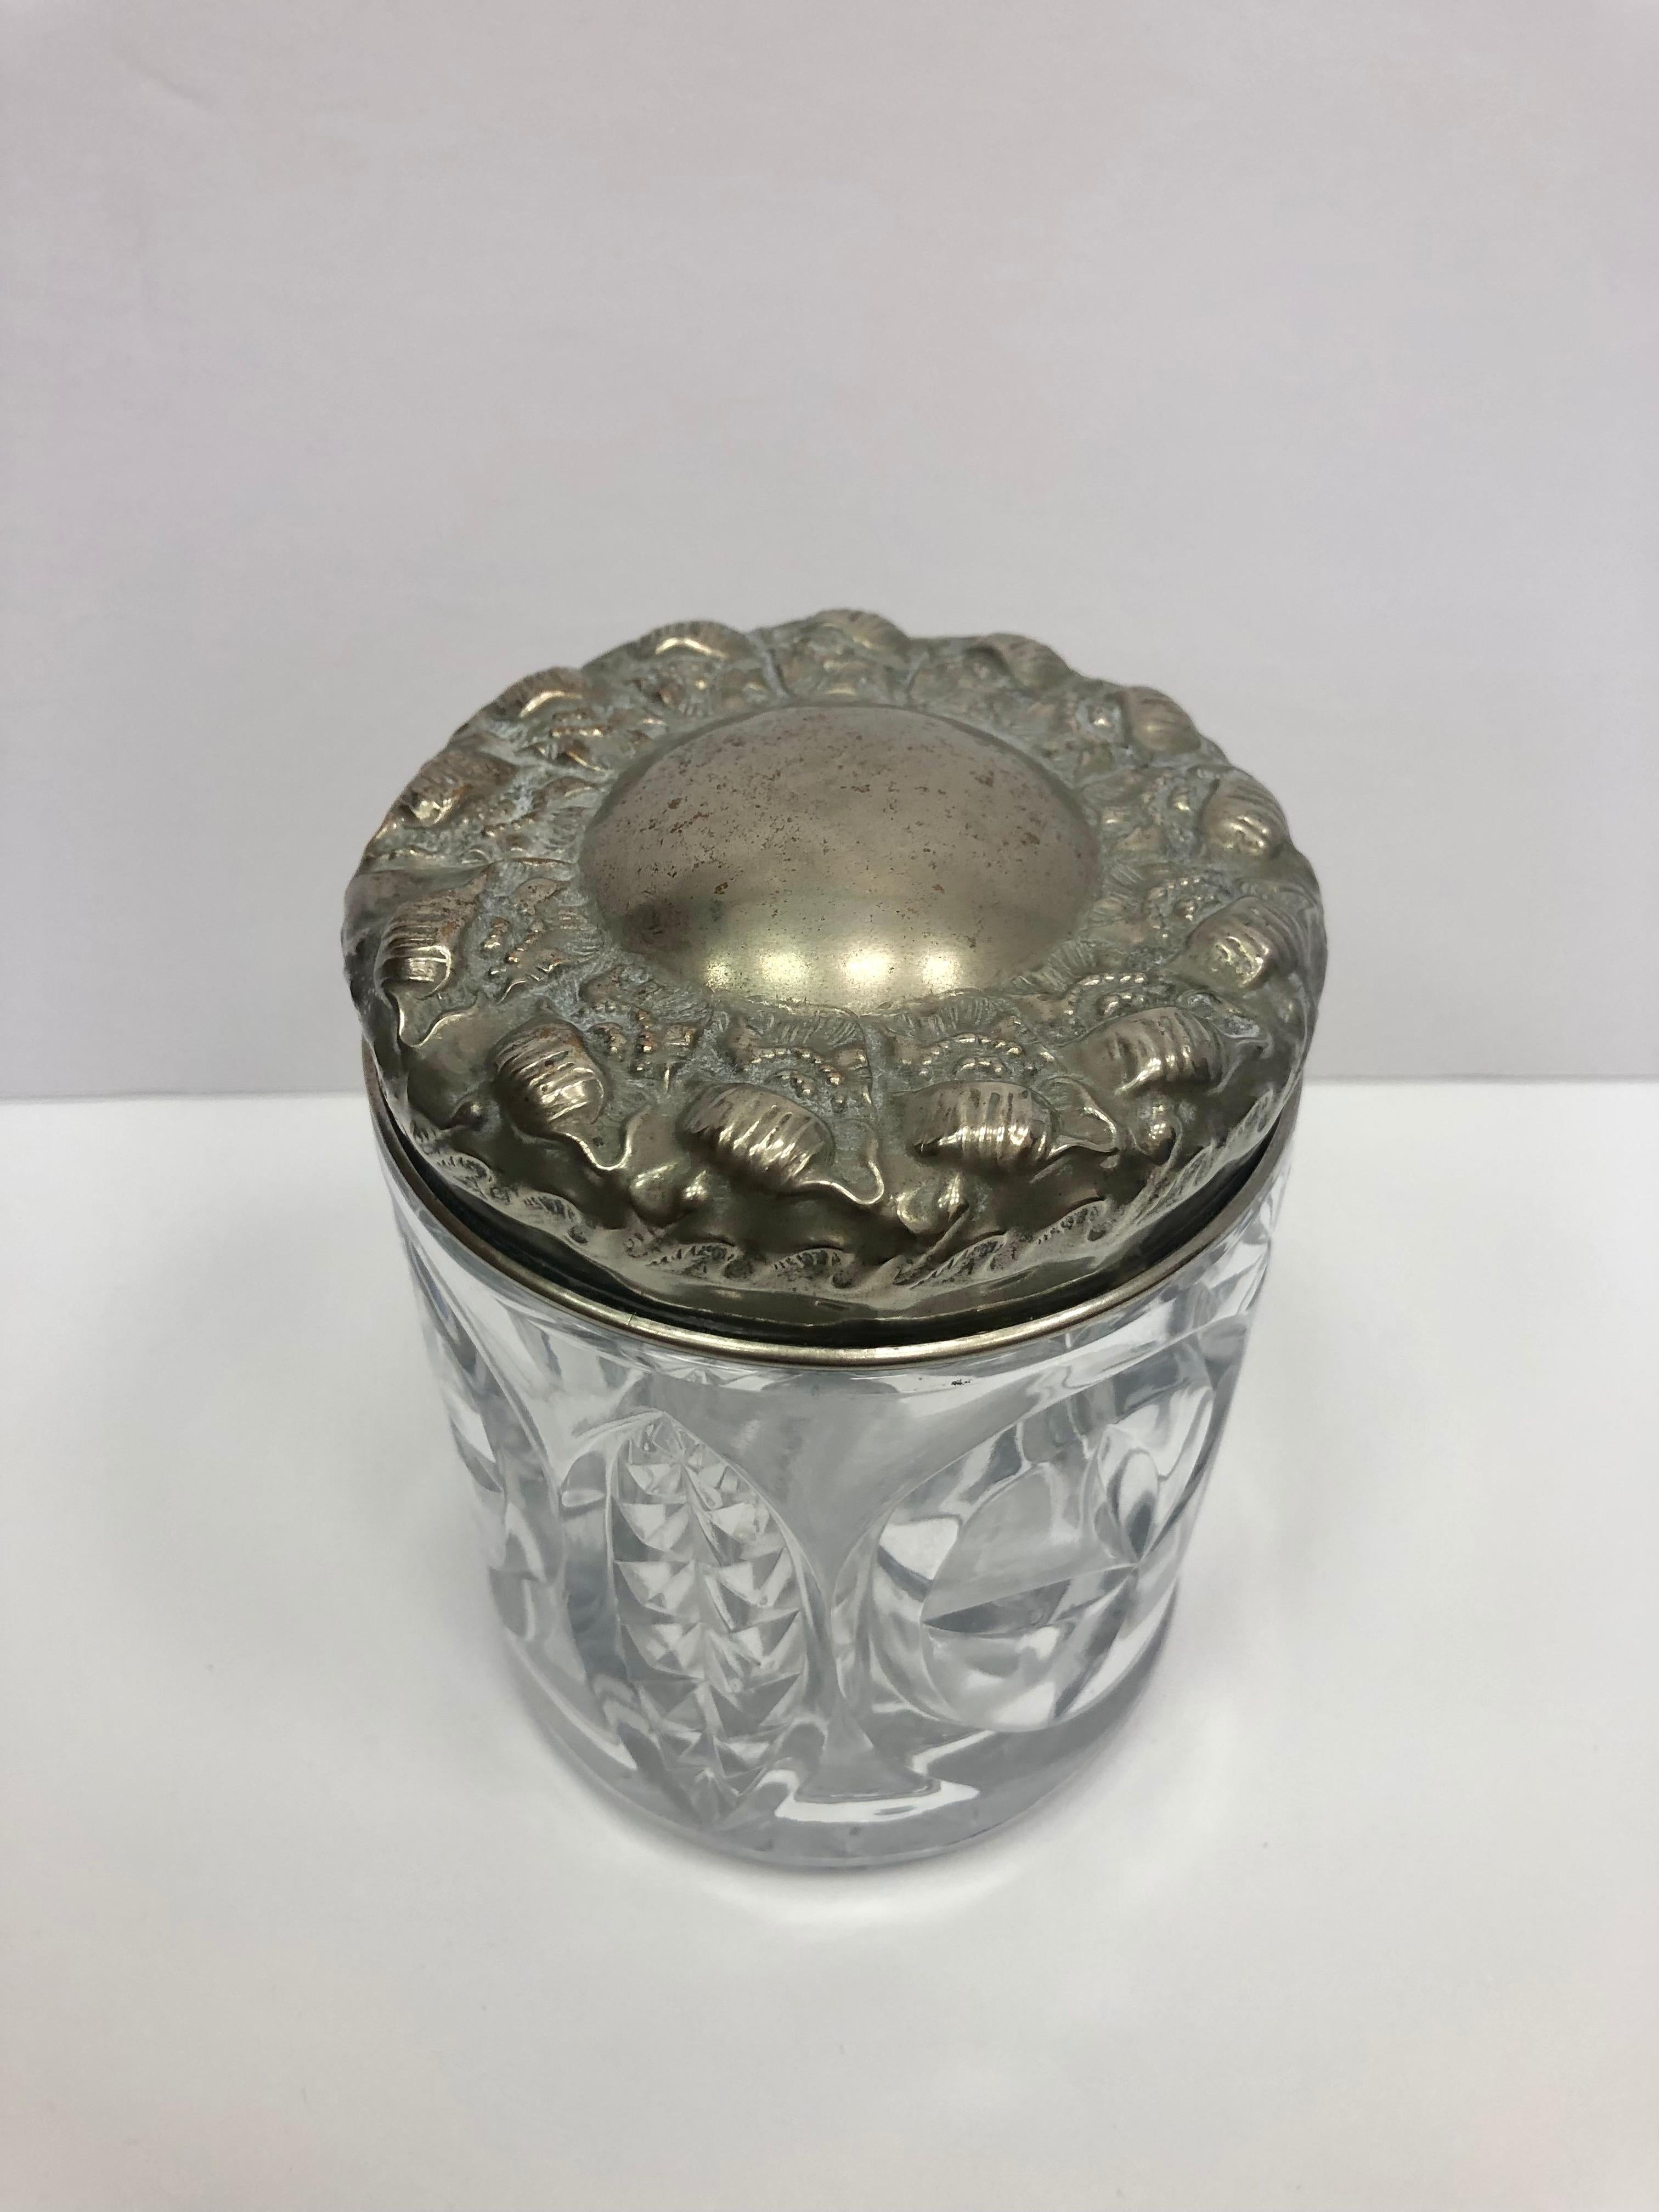 Beautiful antique crystal biscuit jar with a decorative silver lid. This is a nice size crystal jar with a removable decorative lid.